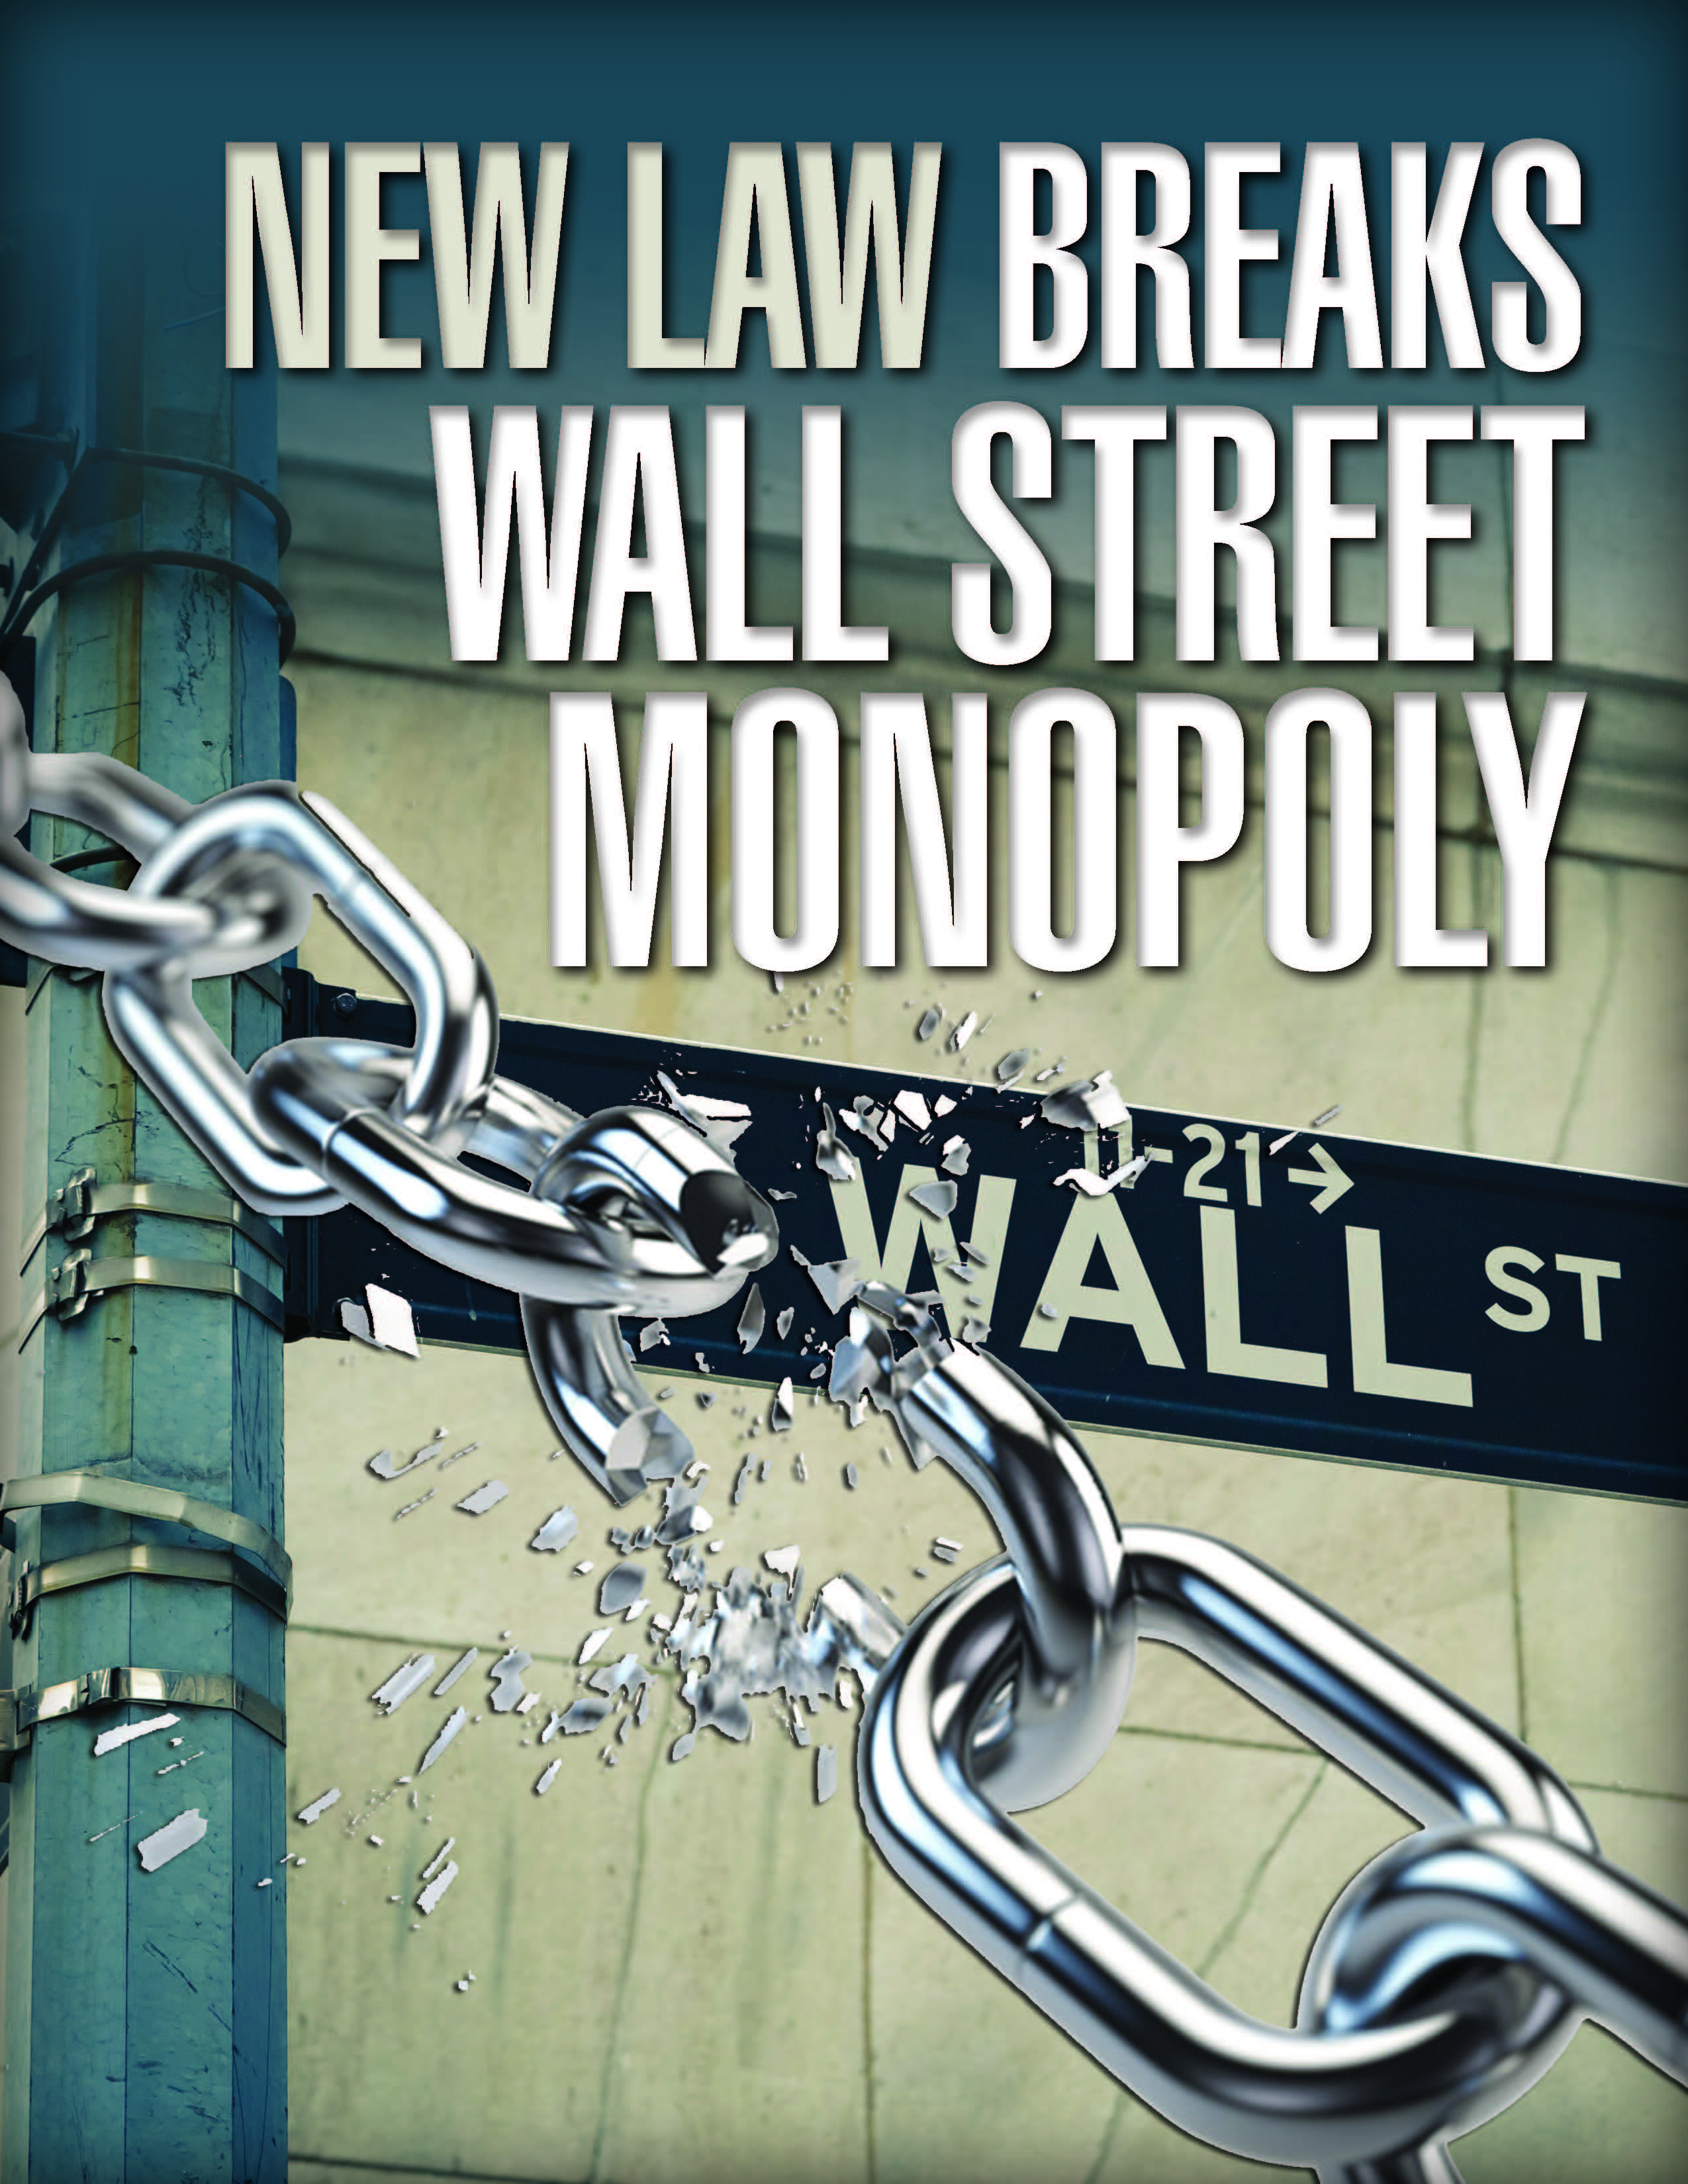 New breaks Wall Street's monopoly on investments